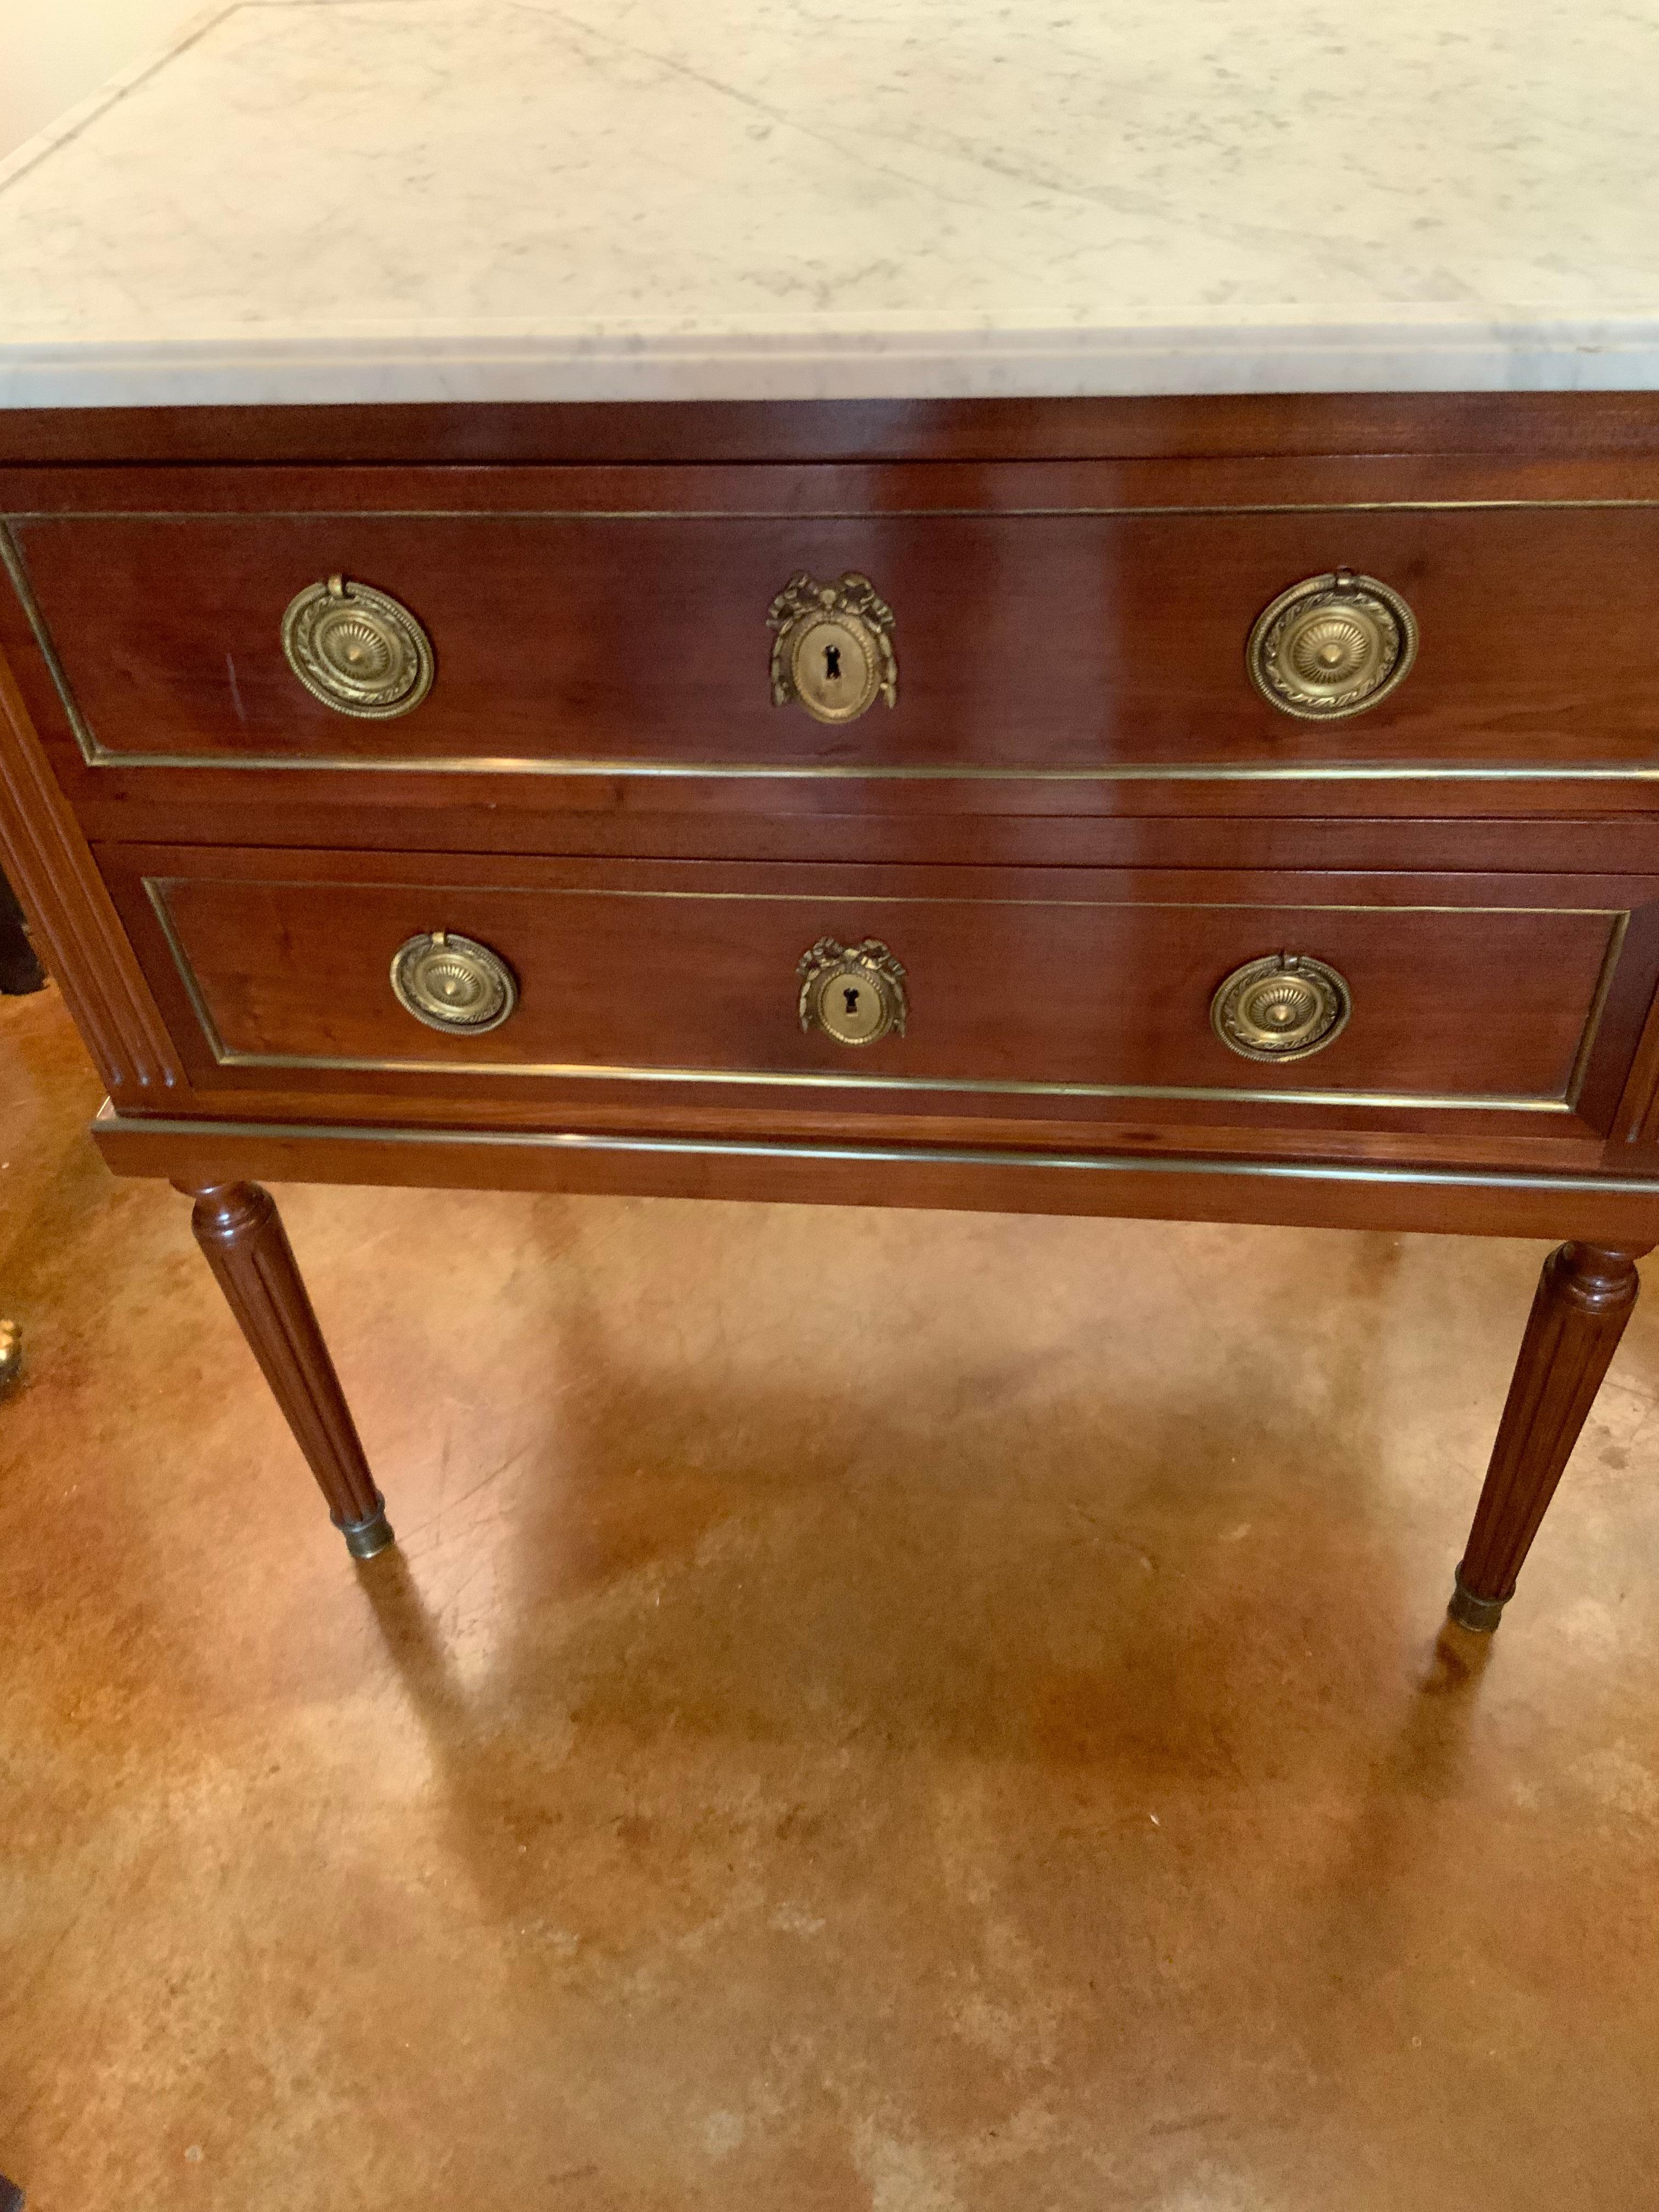 20th Century French Louis XVI-Style Mahogany Commode with White Marb, e Top